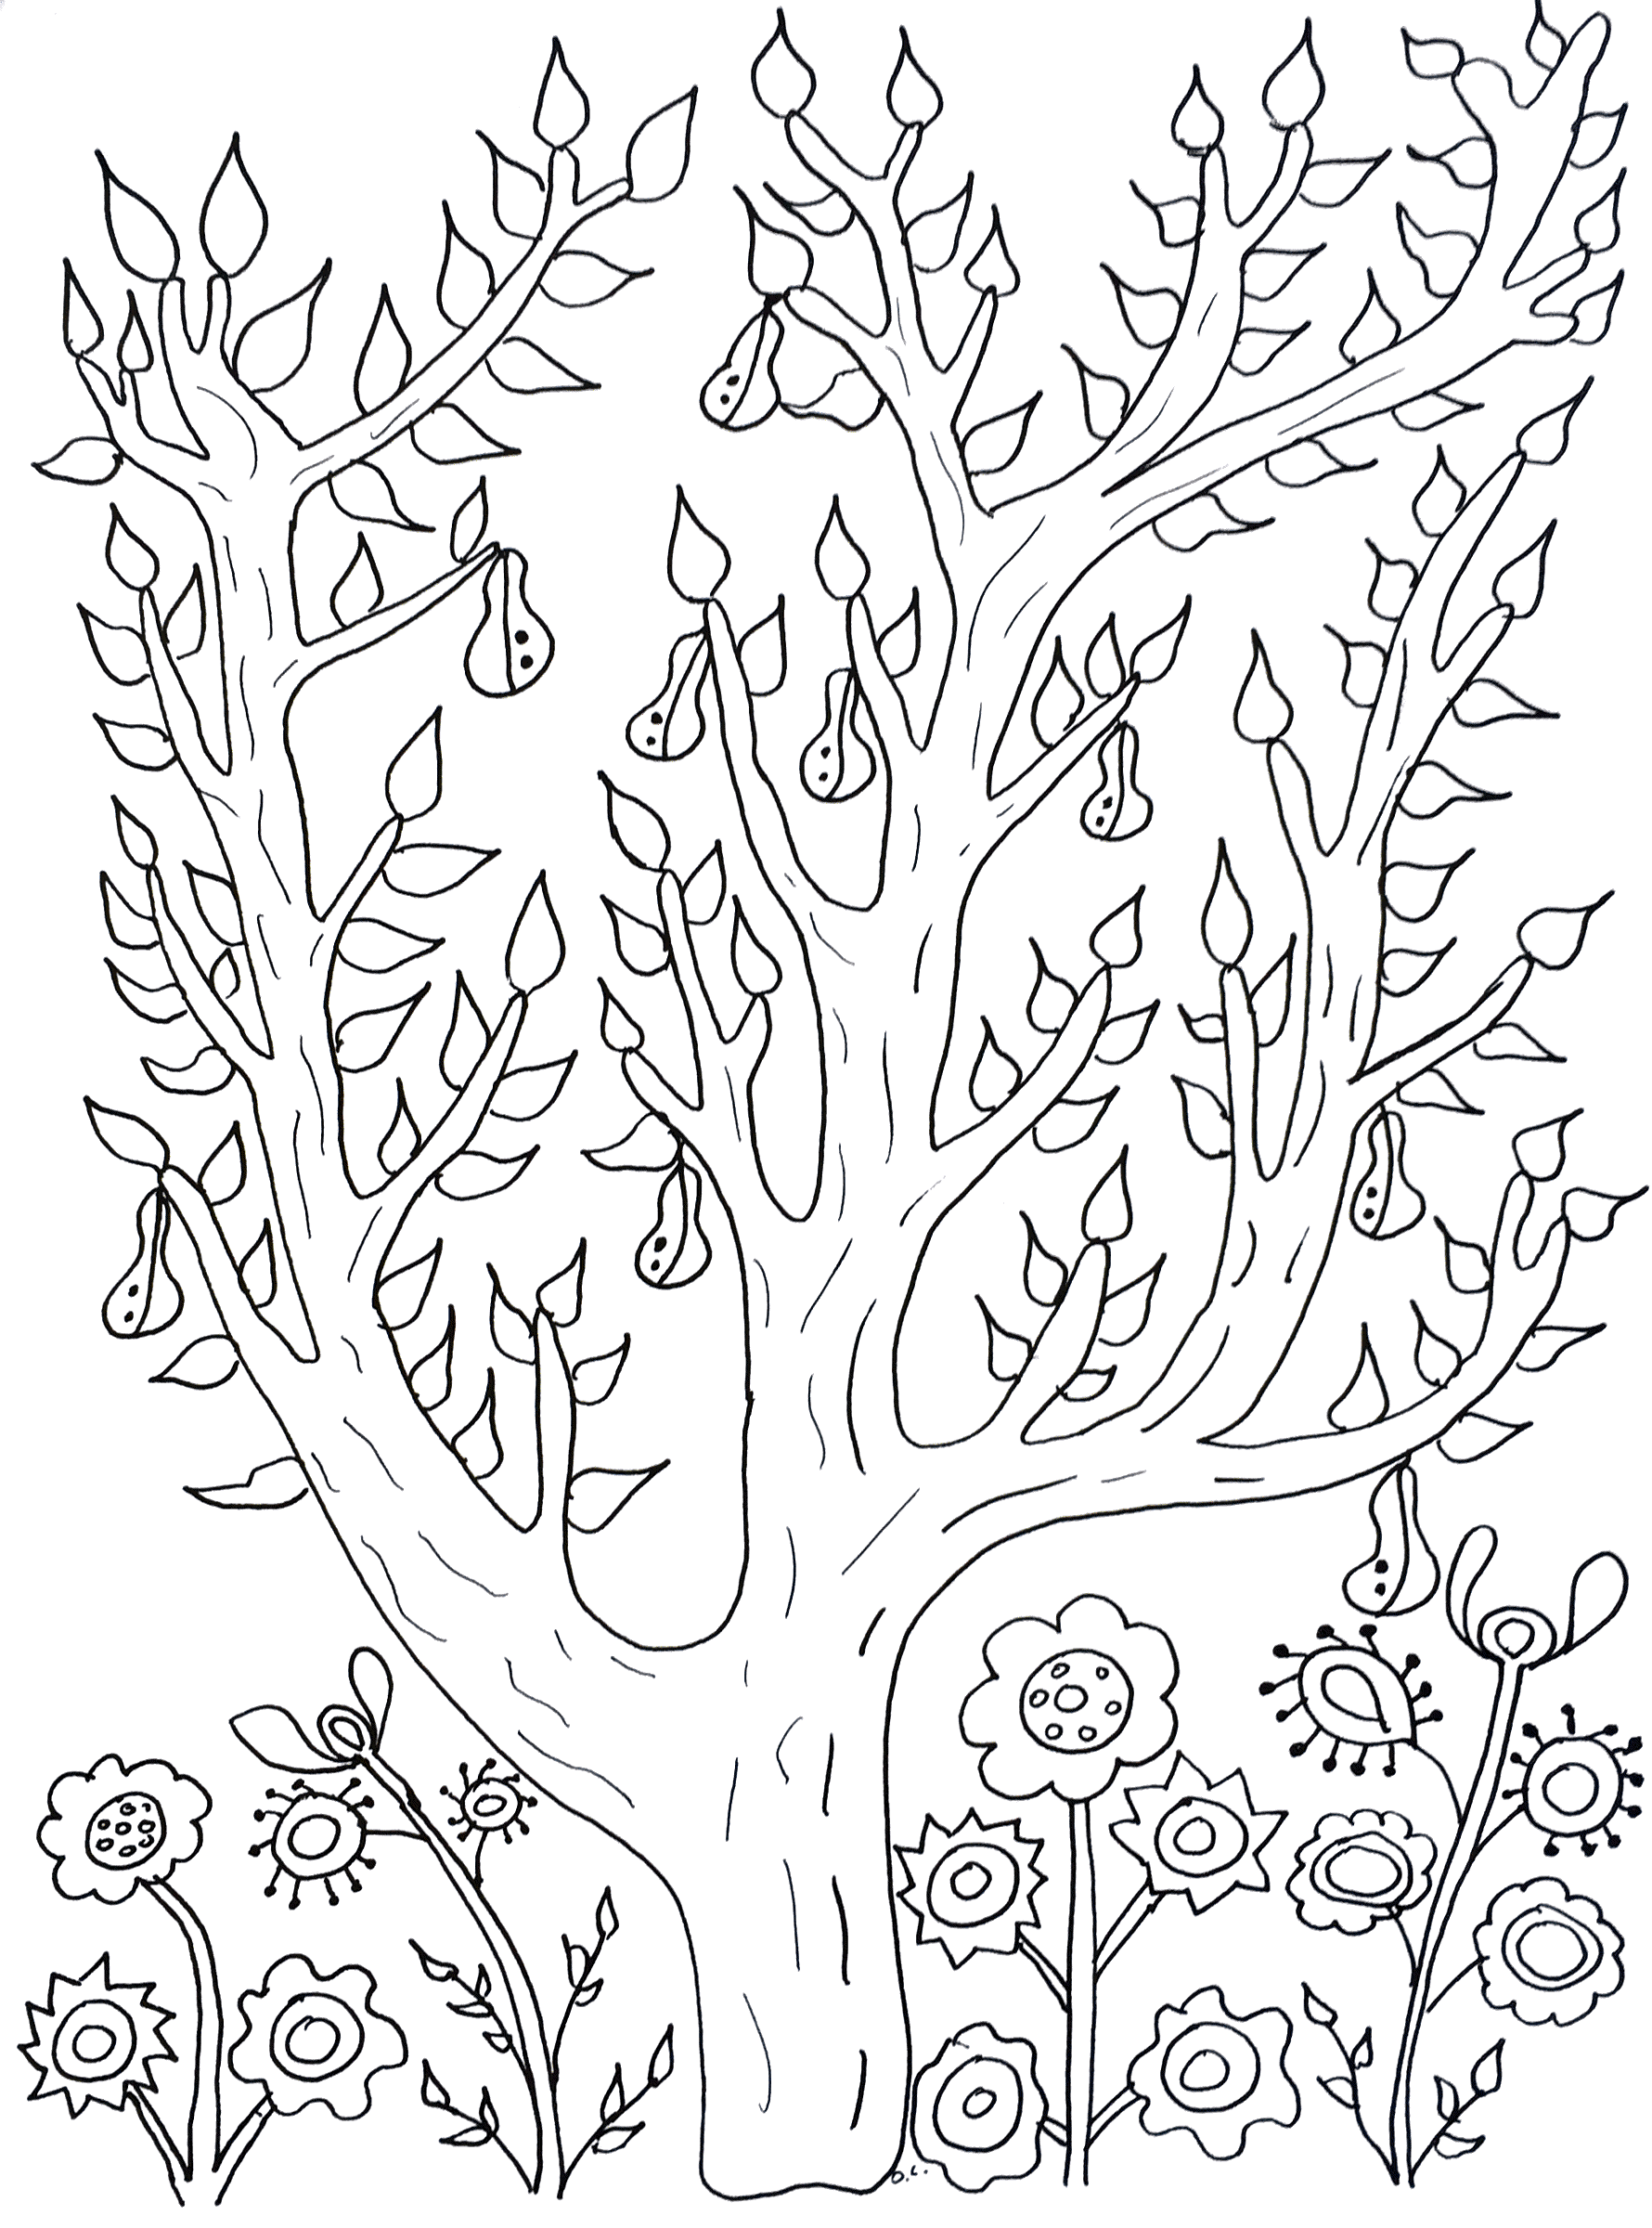 A pretty pear tree to color. Simple coloring of a pear tree, drawn in a very childlike way.It's a very relaxing coloring for you to escape and unwind. You can add bright, warm colors to give your pretty pear tree even more life, Artist : Olivier